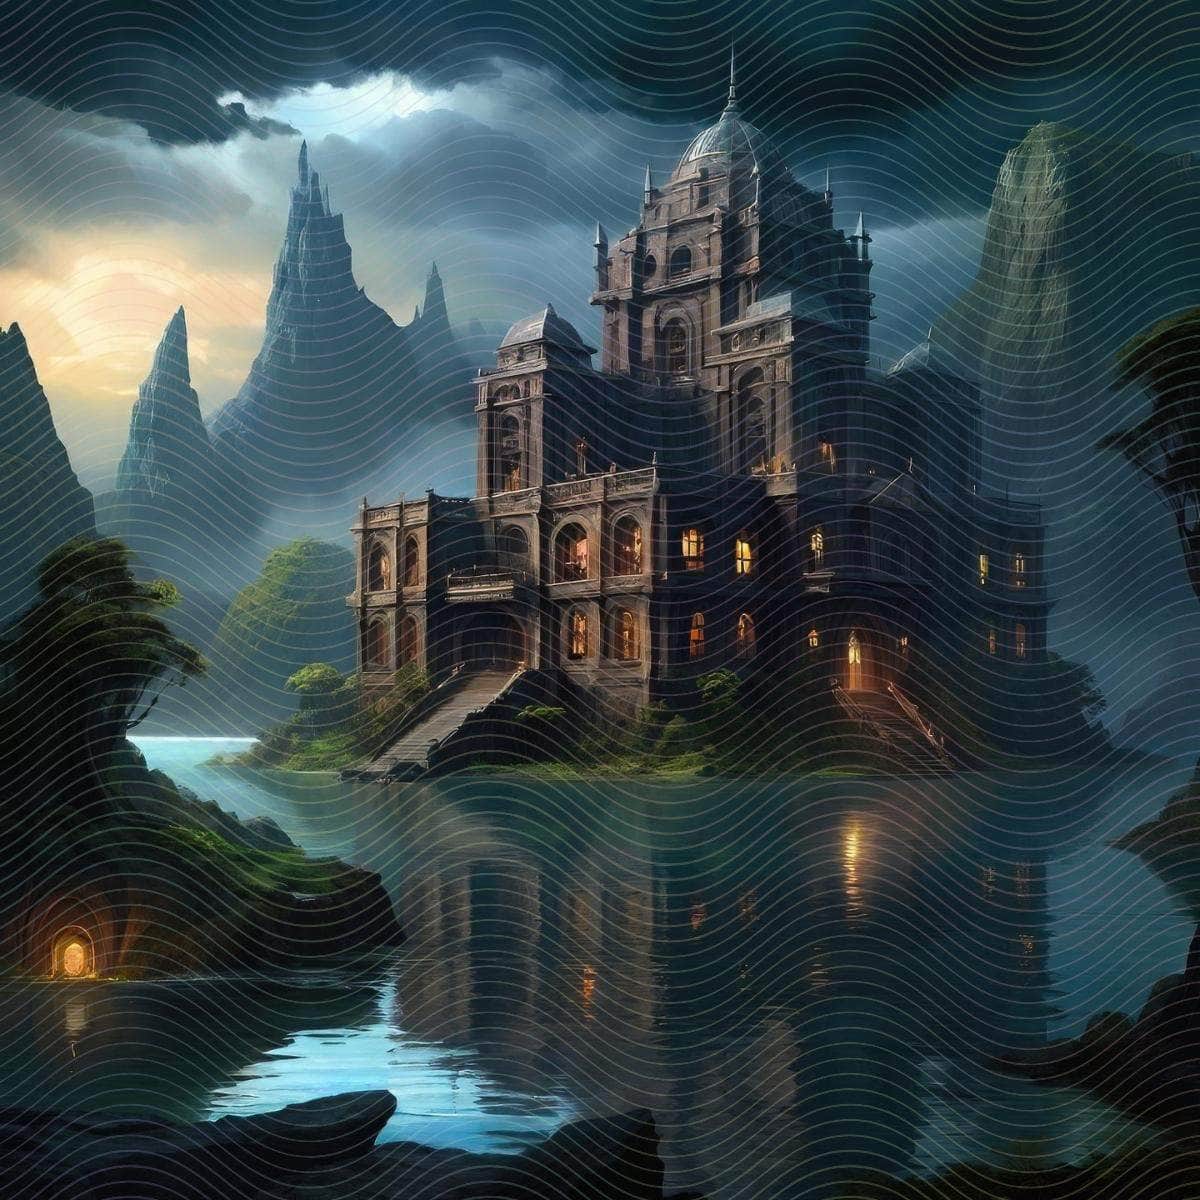 A Lit Fantasy Castle Surrounded By Water